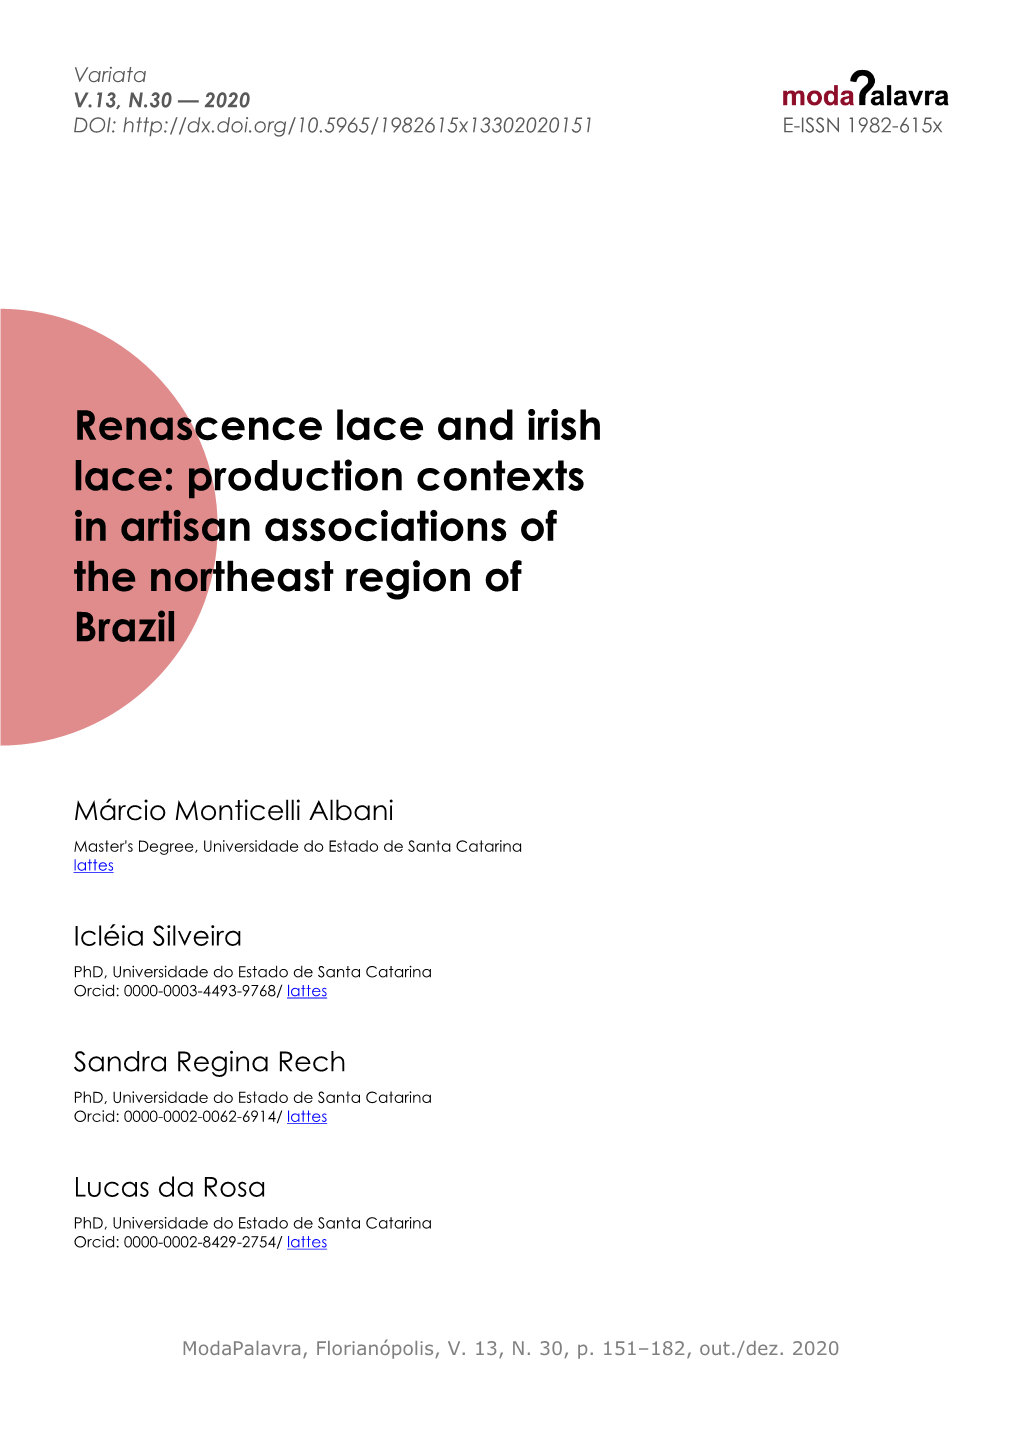 Renascence Lace and Irish Lace: Production Contexts in Artisan Associations of the Northeast Region of Brazil